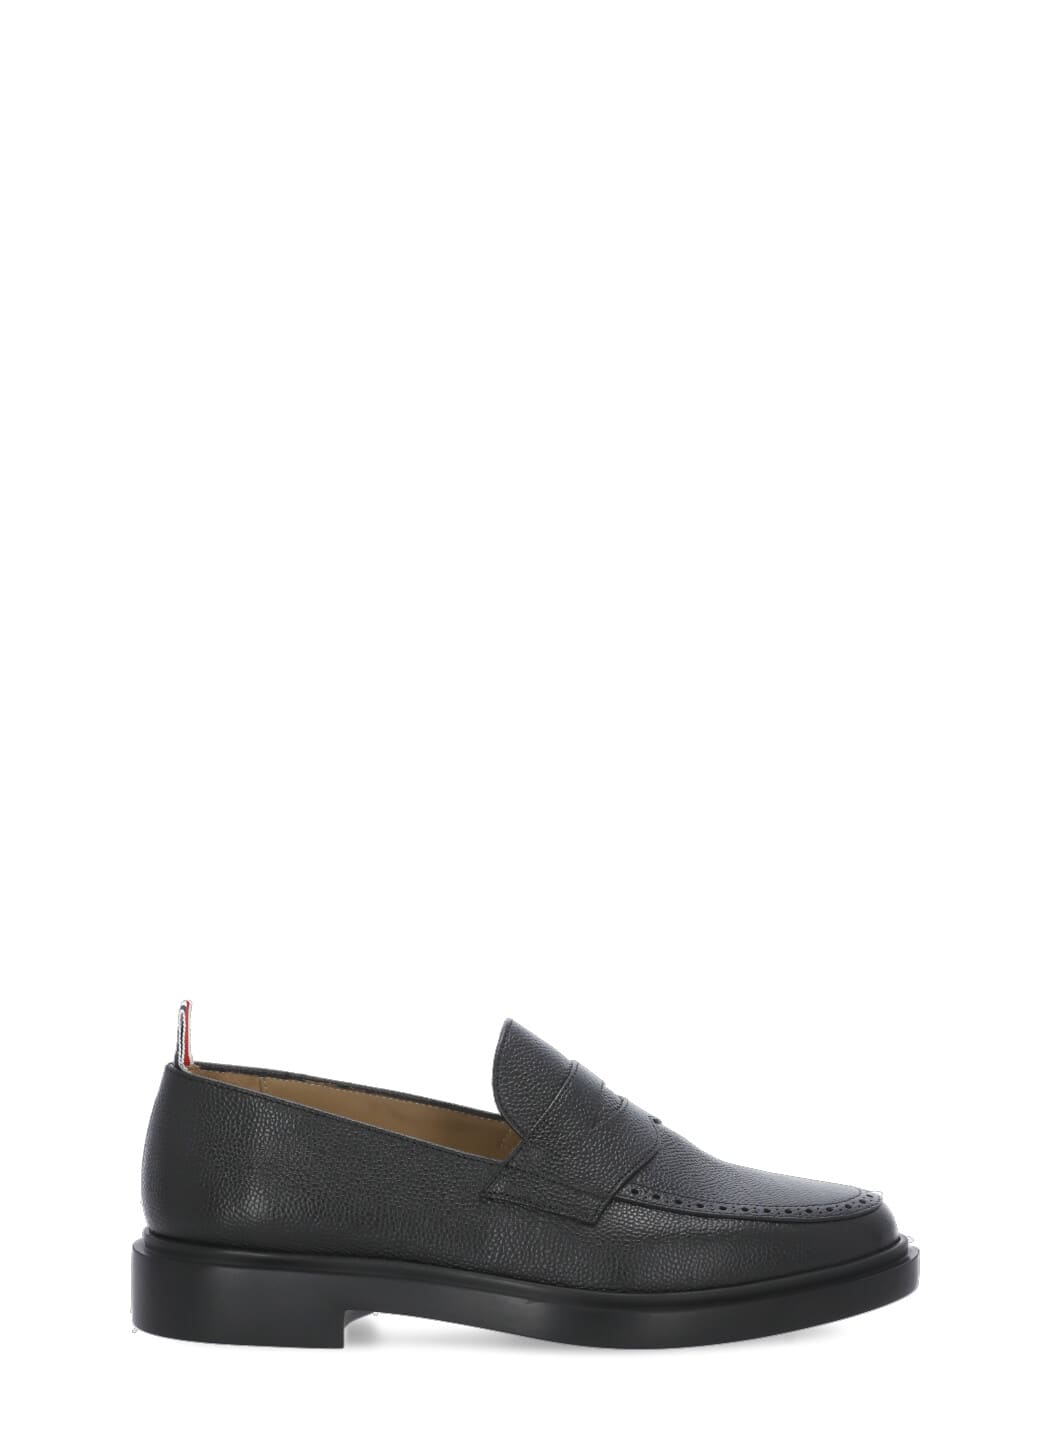 Thom Browne Penny Loafer